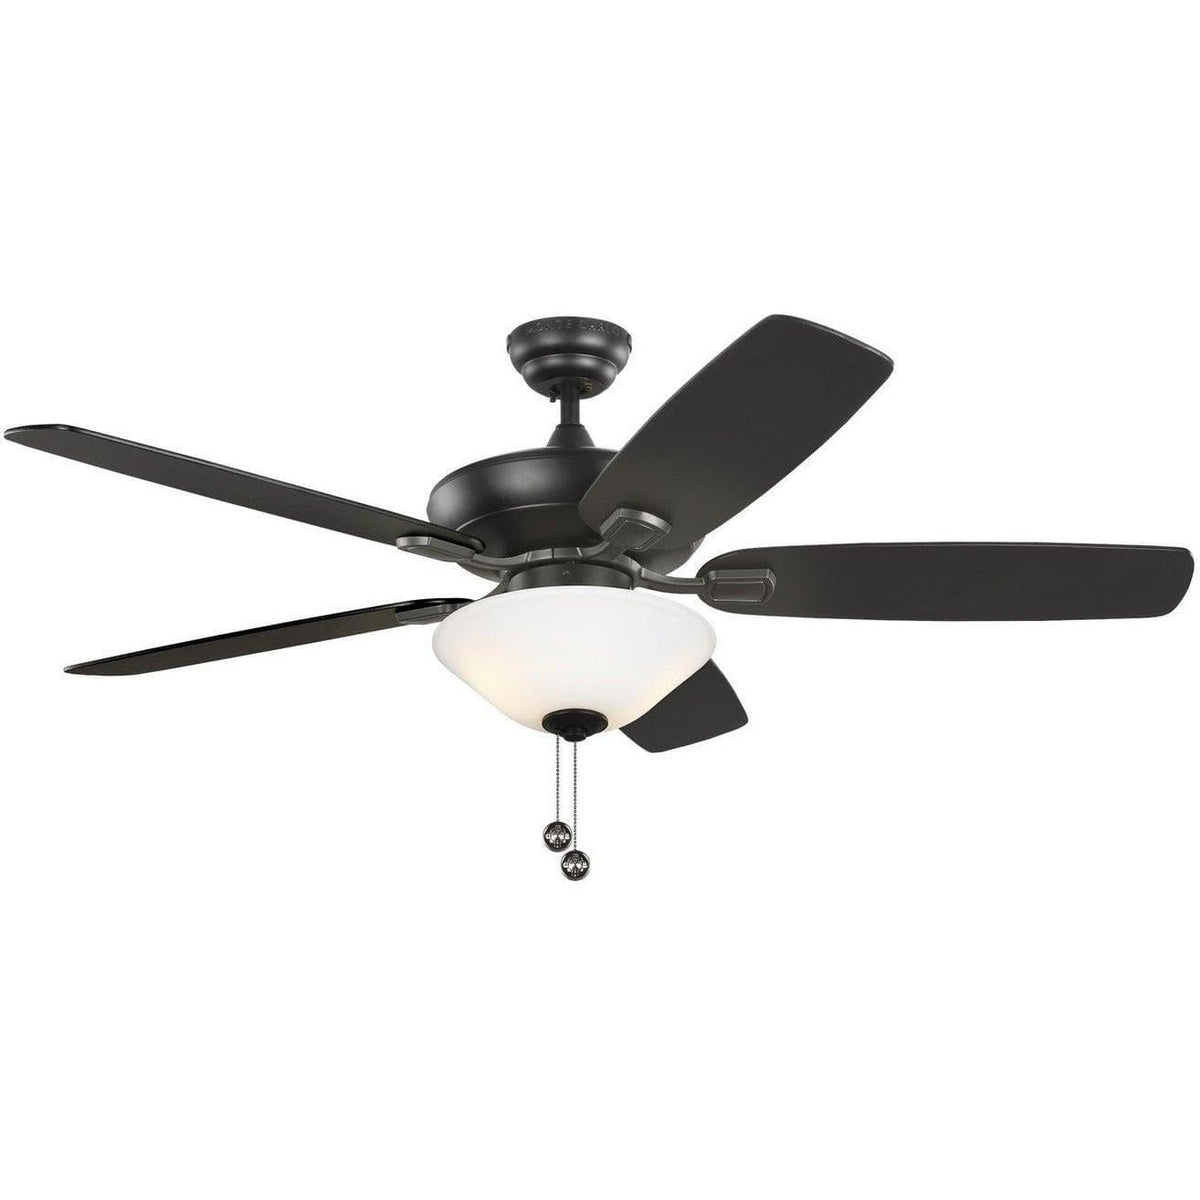 Visual Comfort Fan Collection - Colony Max 52" Ceiling Fan - 5COM52MBKD-V1 | Montreal Lighting & Hardware